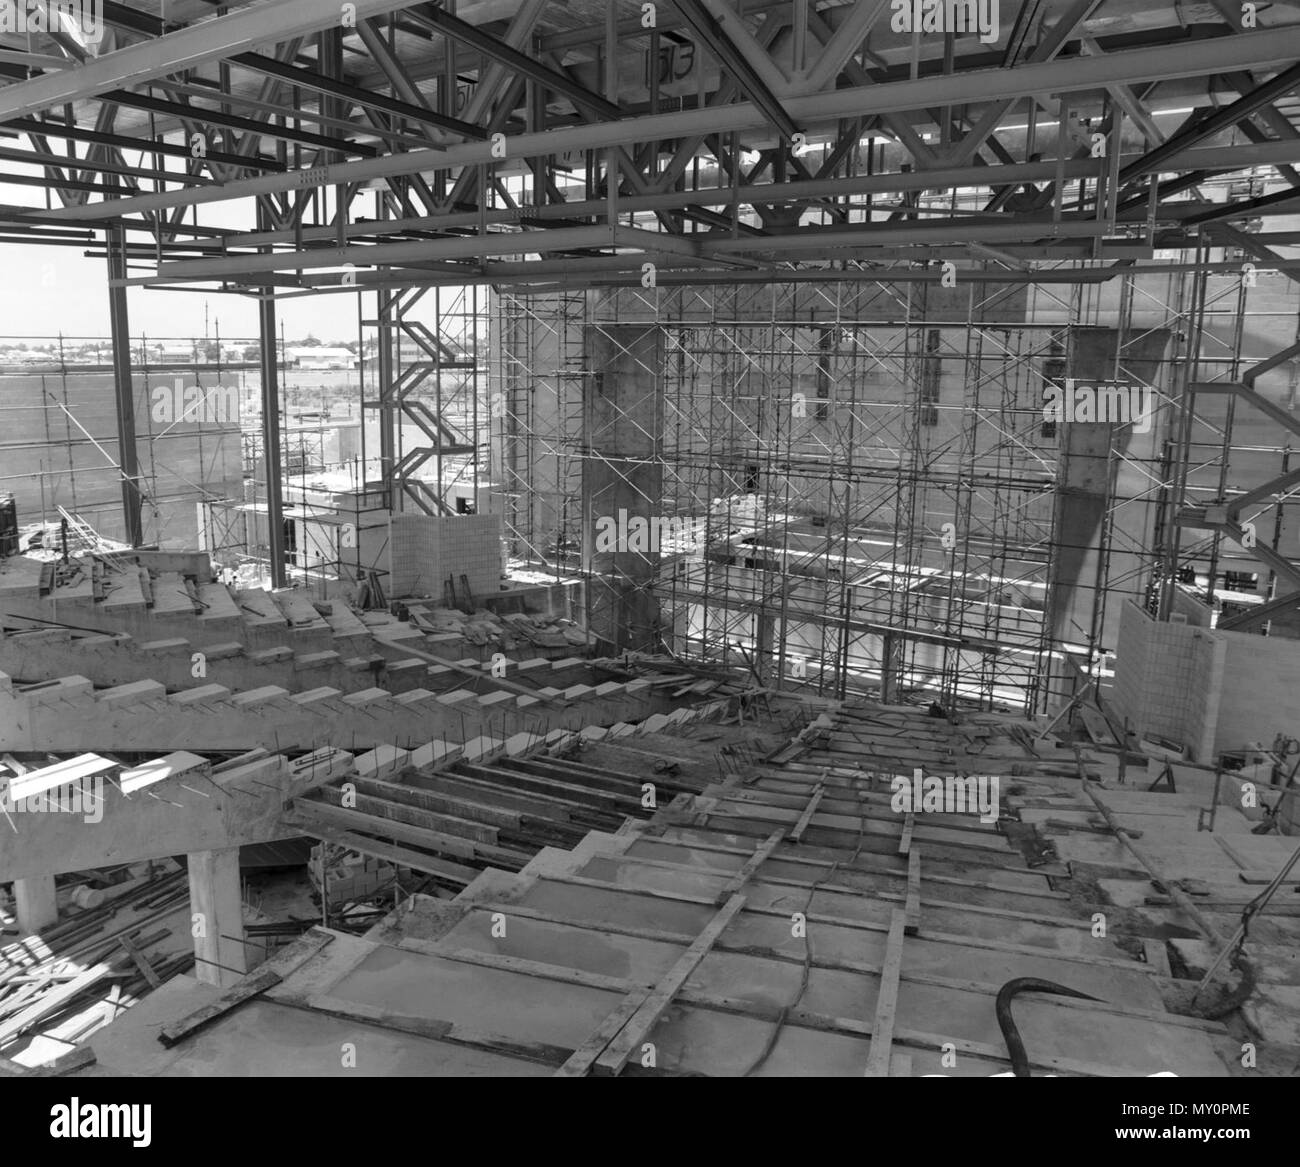 Queensland Performing Arts Centre under construction, South Brisbane, c 1981. Preliminary work for the Queensland Performing Arts Centre commenced in 1976 and it was opened in April 1985. Stock Photo